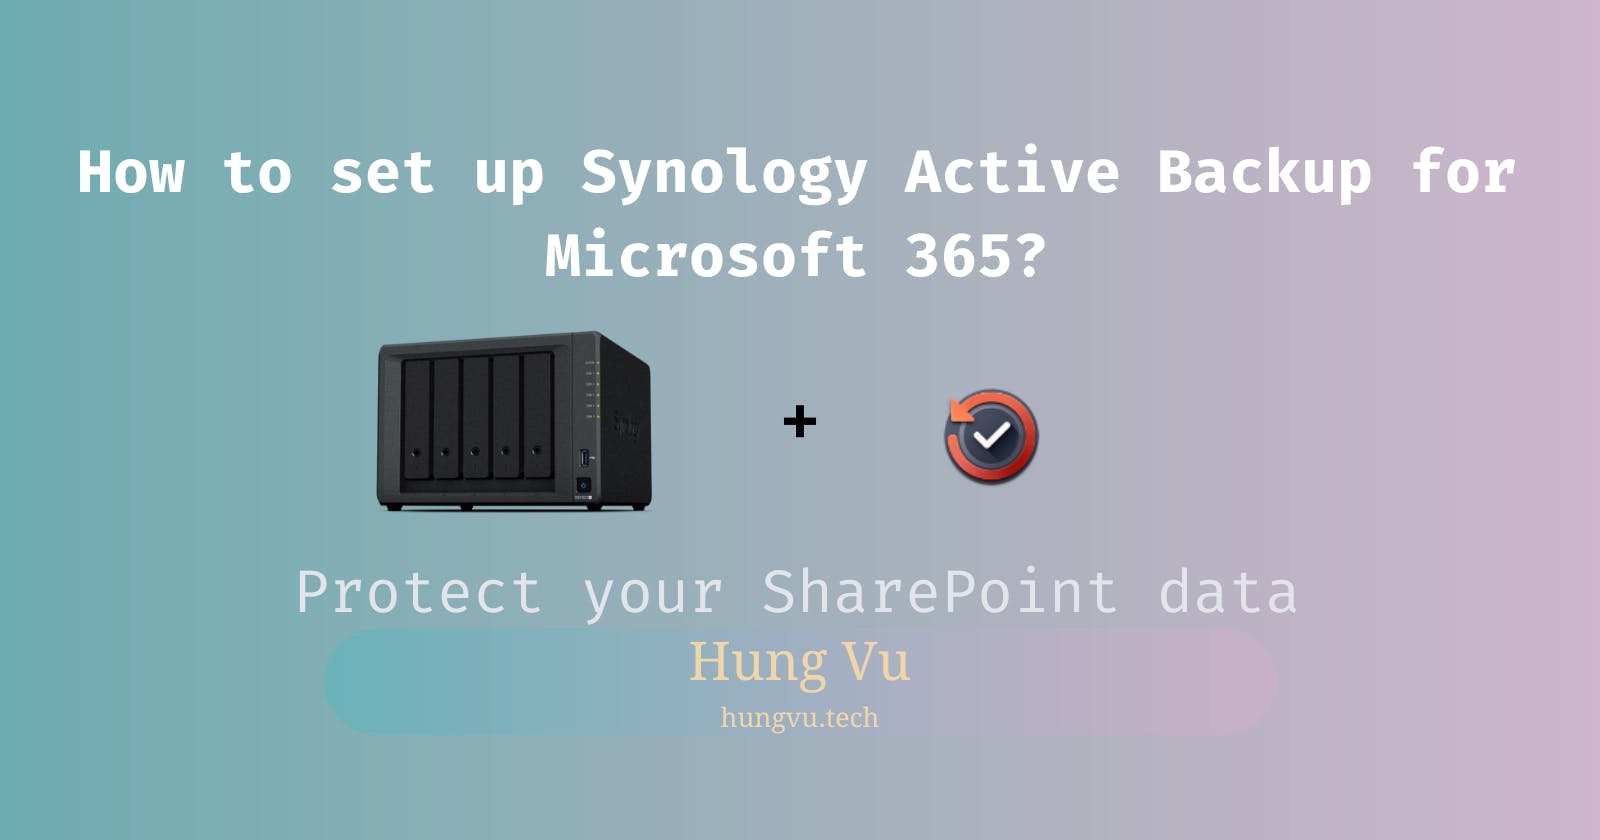 How to back up Microsoft 365 with Synology Active Backup?